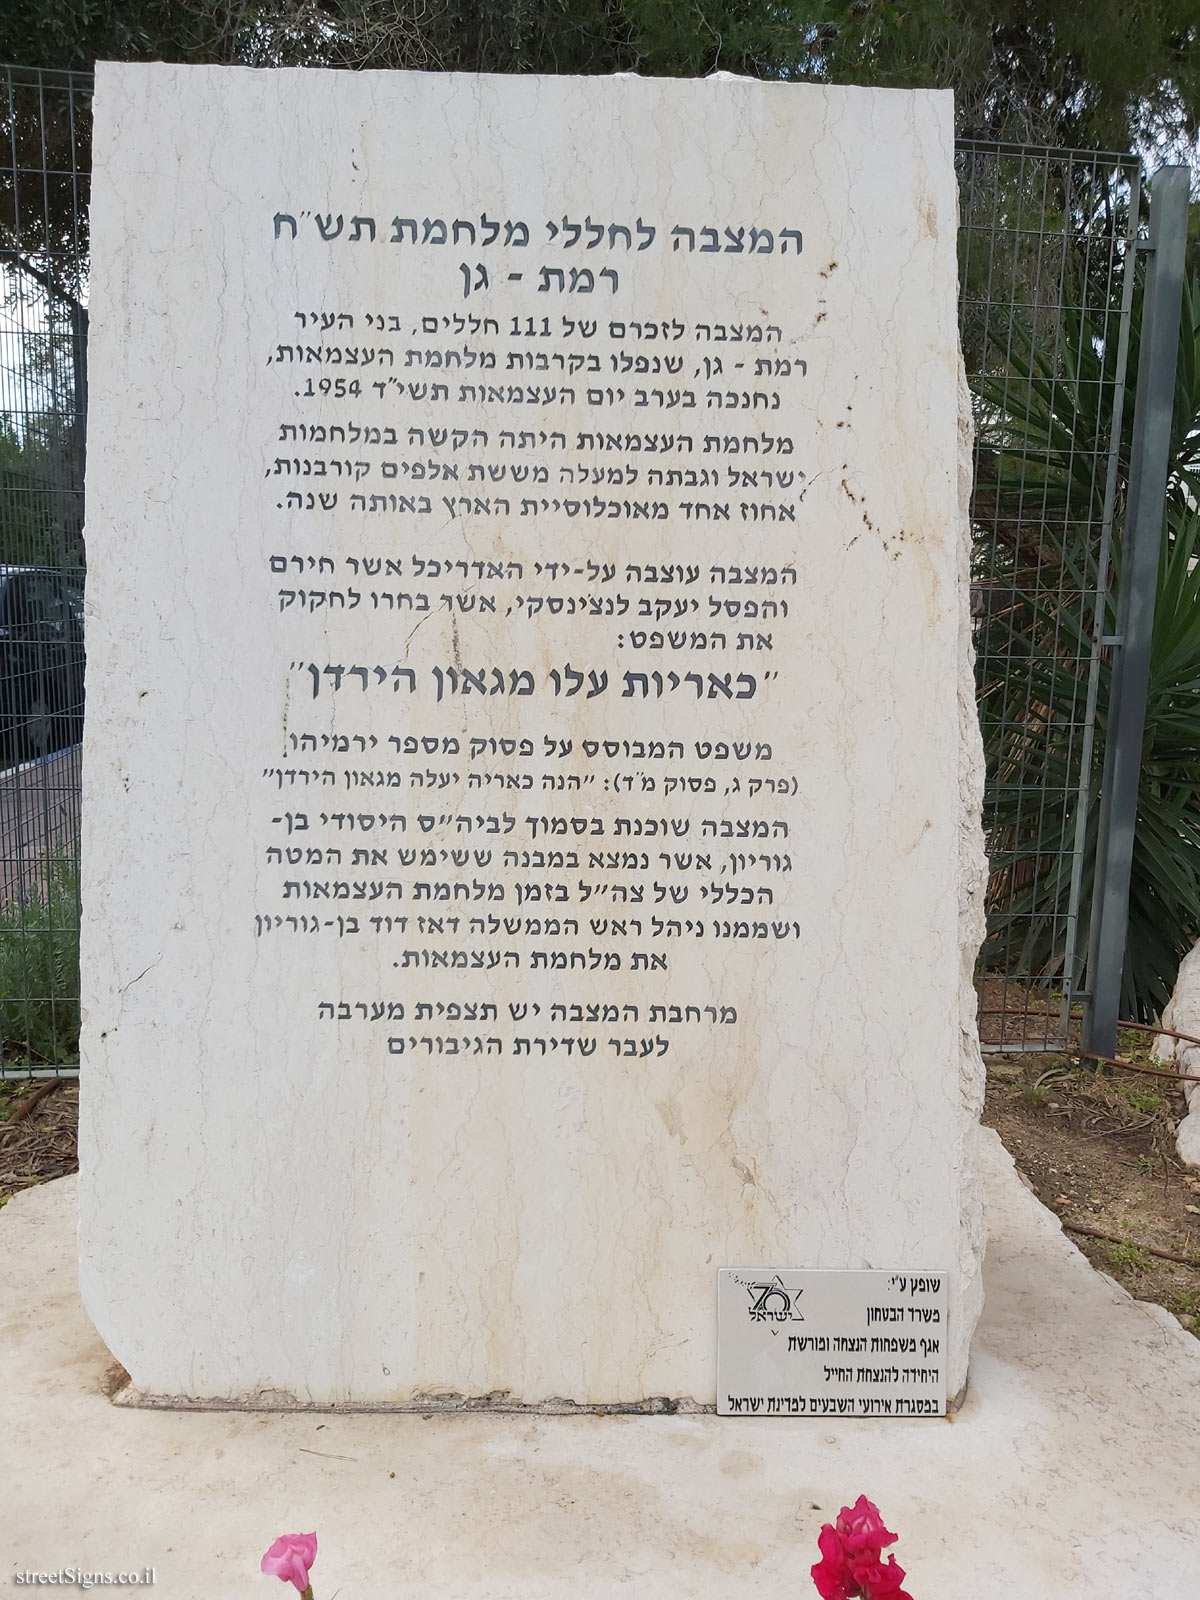 Ramat Gan - the monument to the victims of the 1948 war